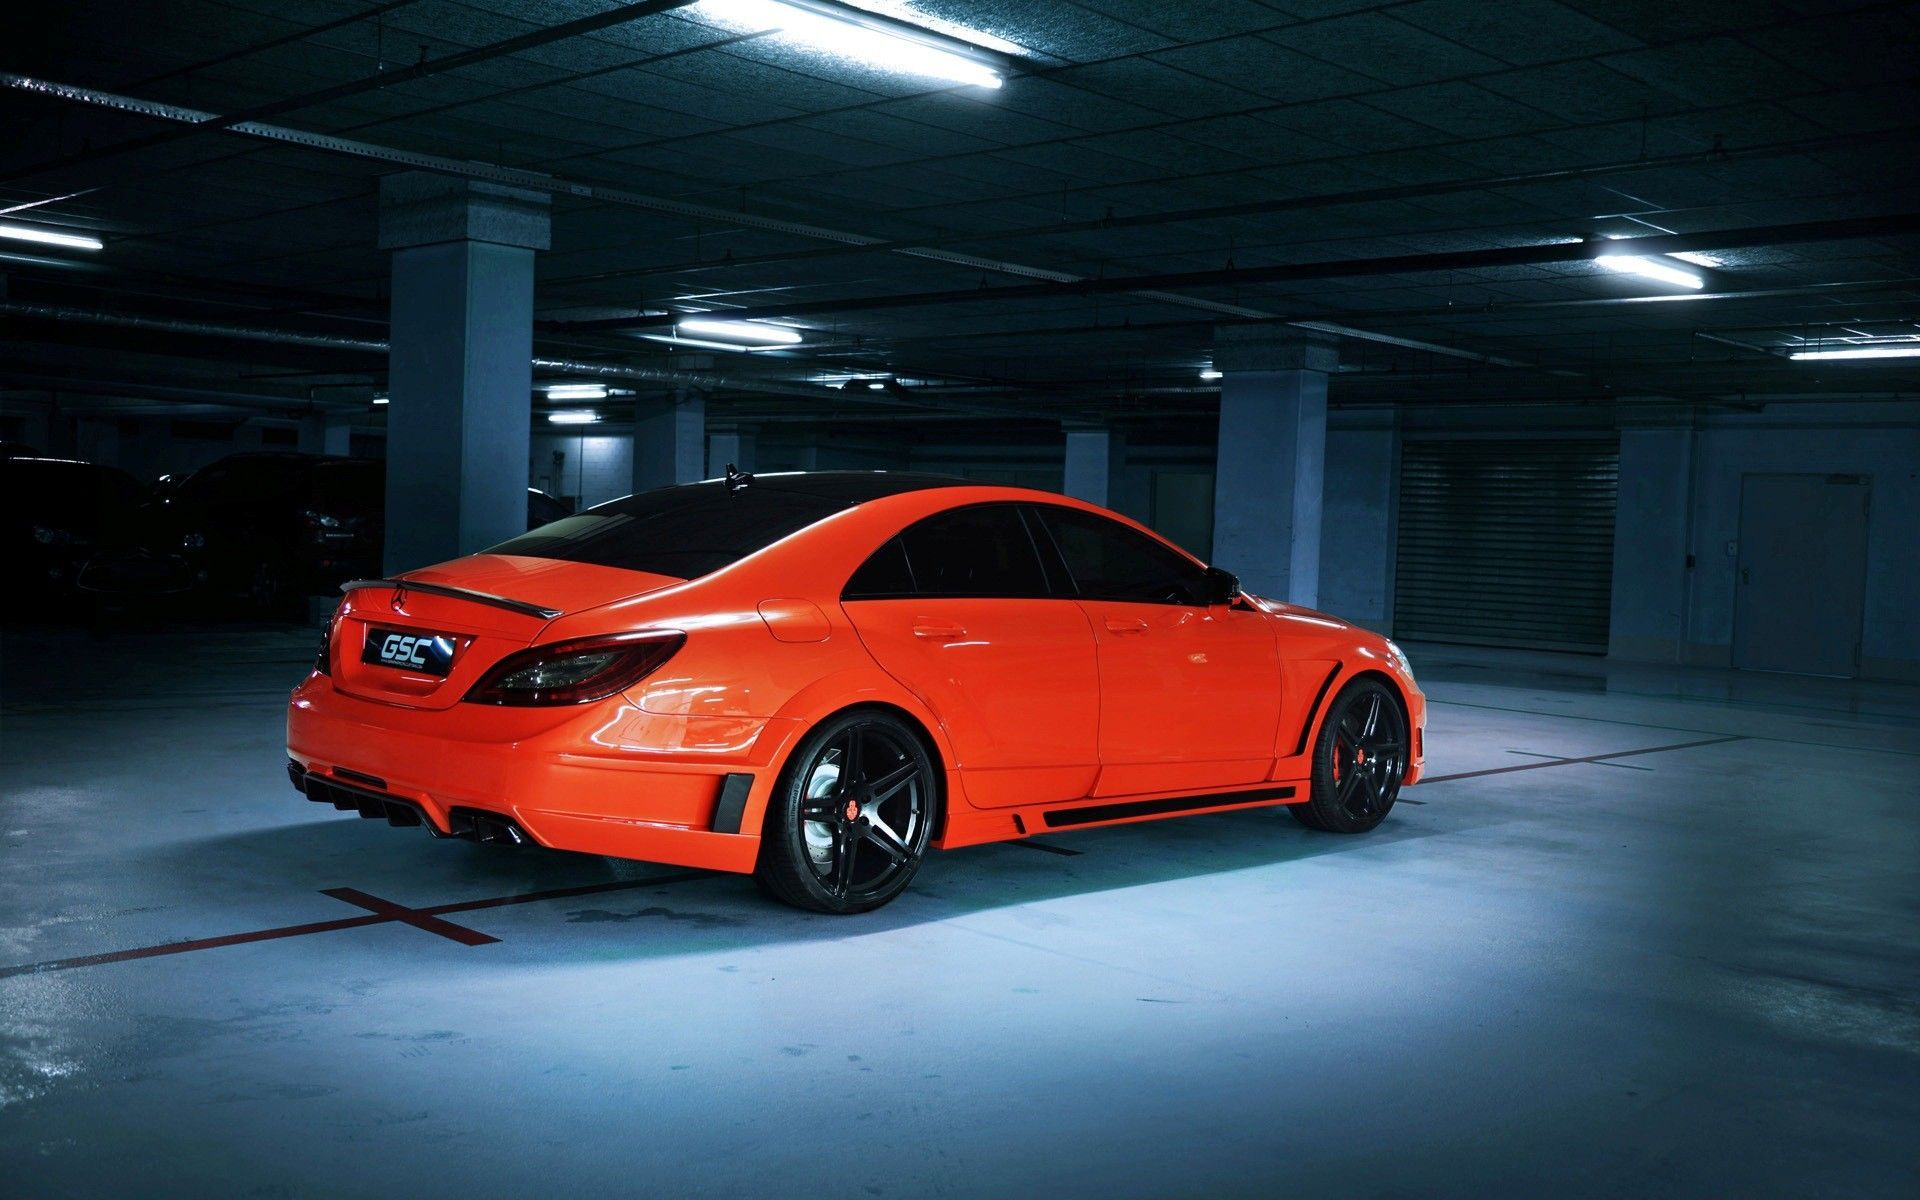 GSC tuned Mercedes CLS63 AMG. image for desktop and wallpaper